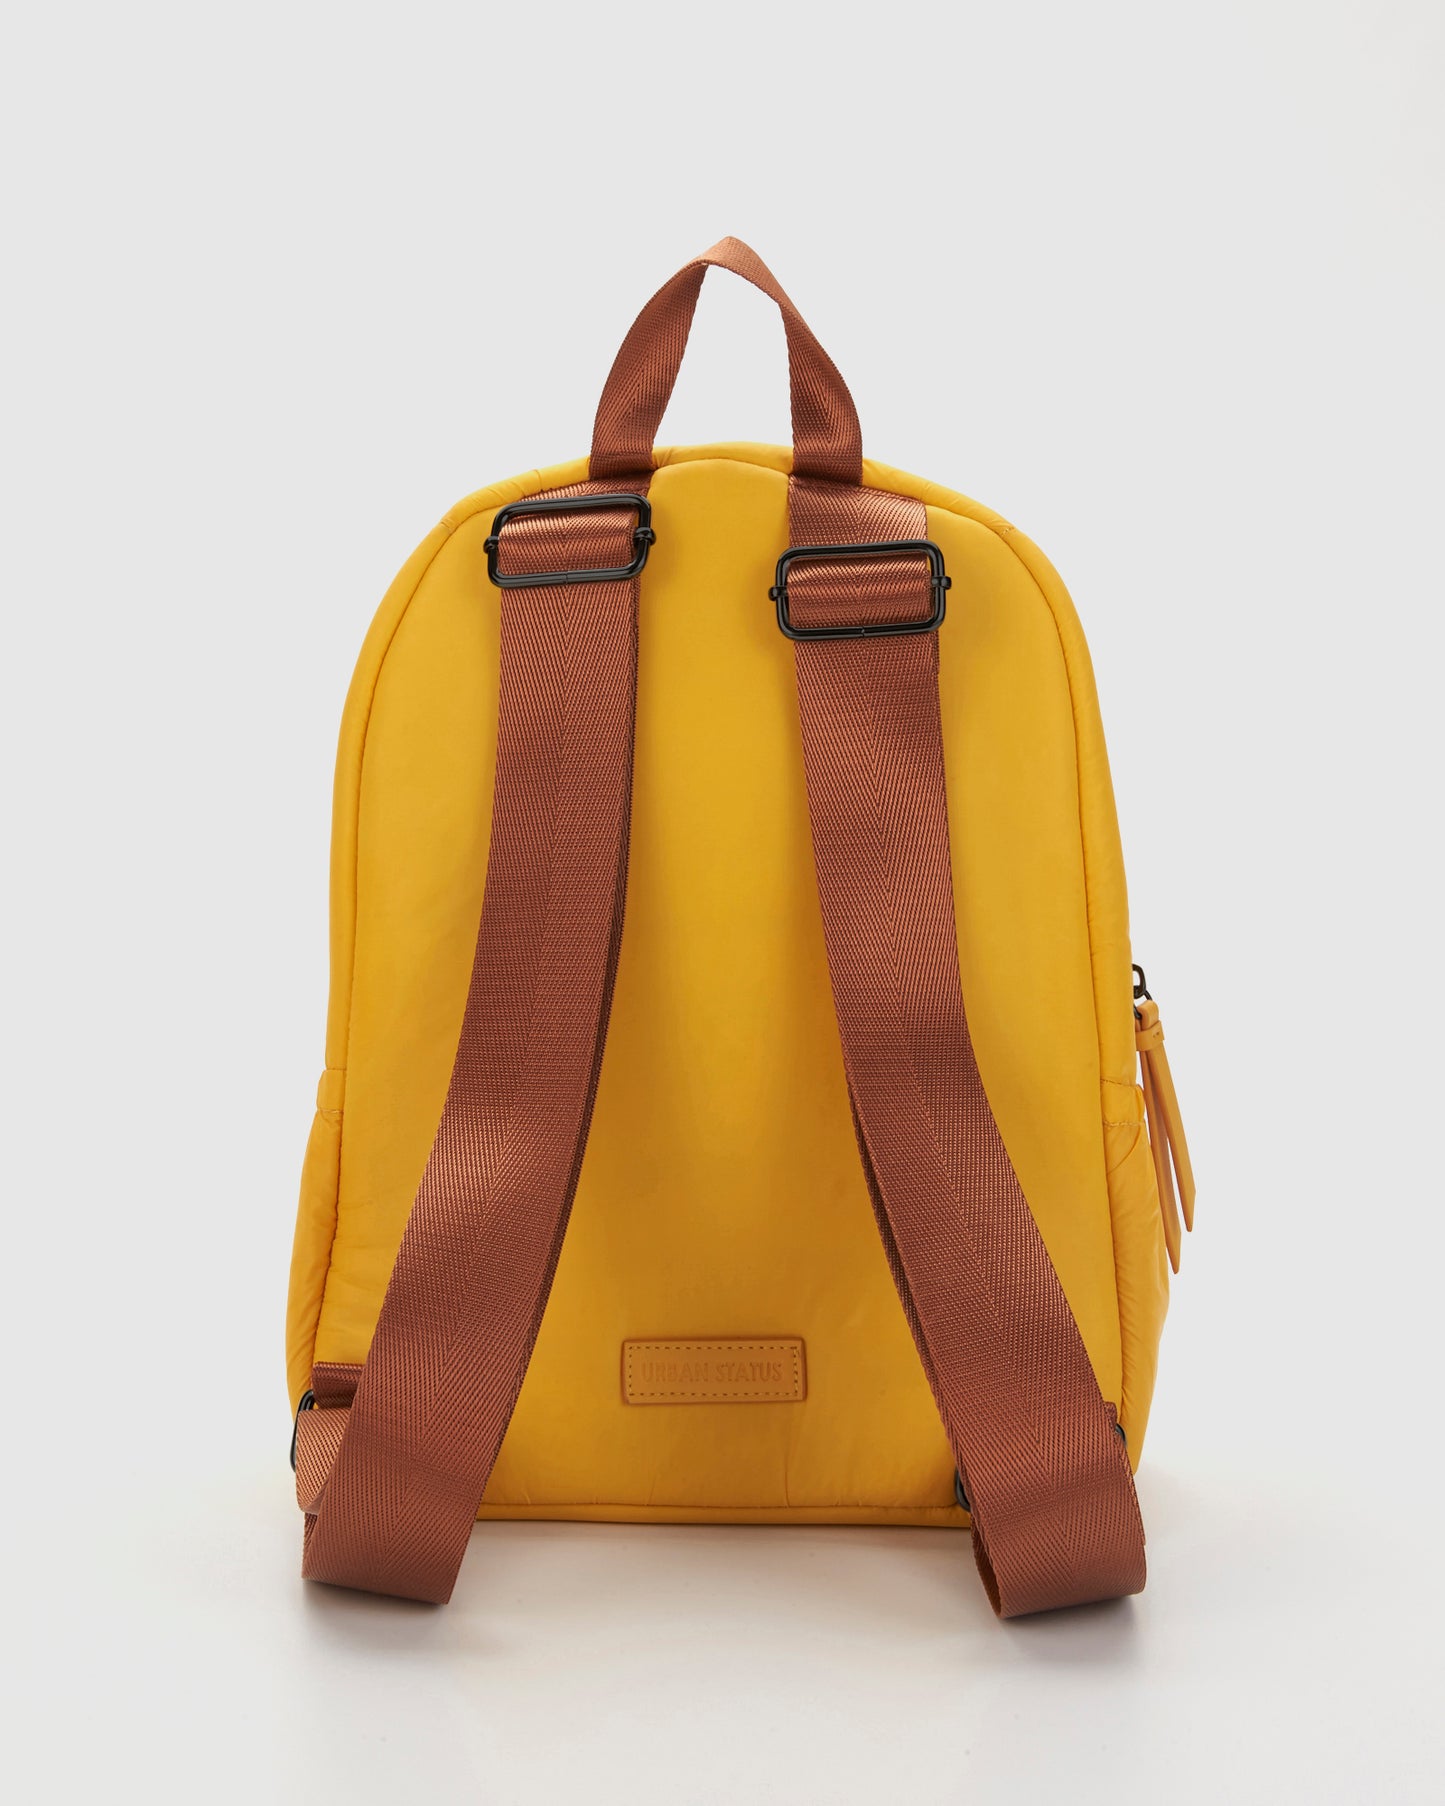 The Chloe Puff Back Pack - Yellow